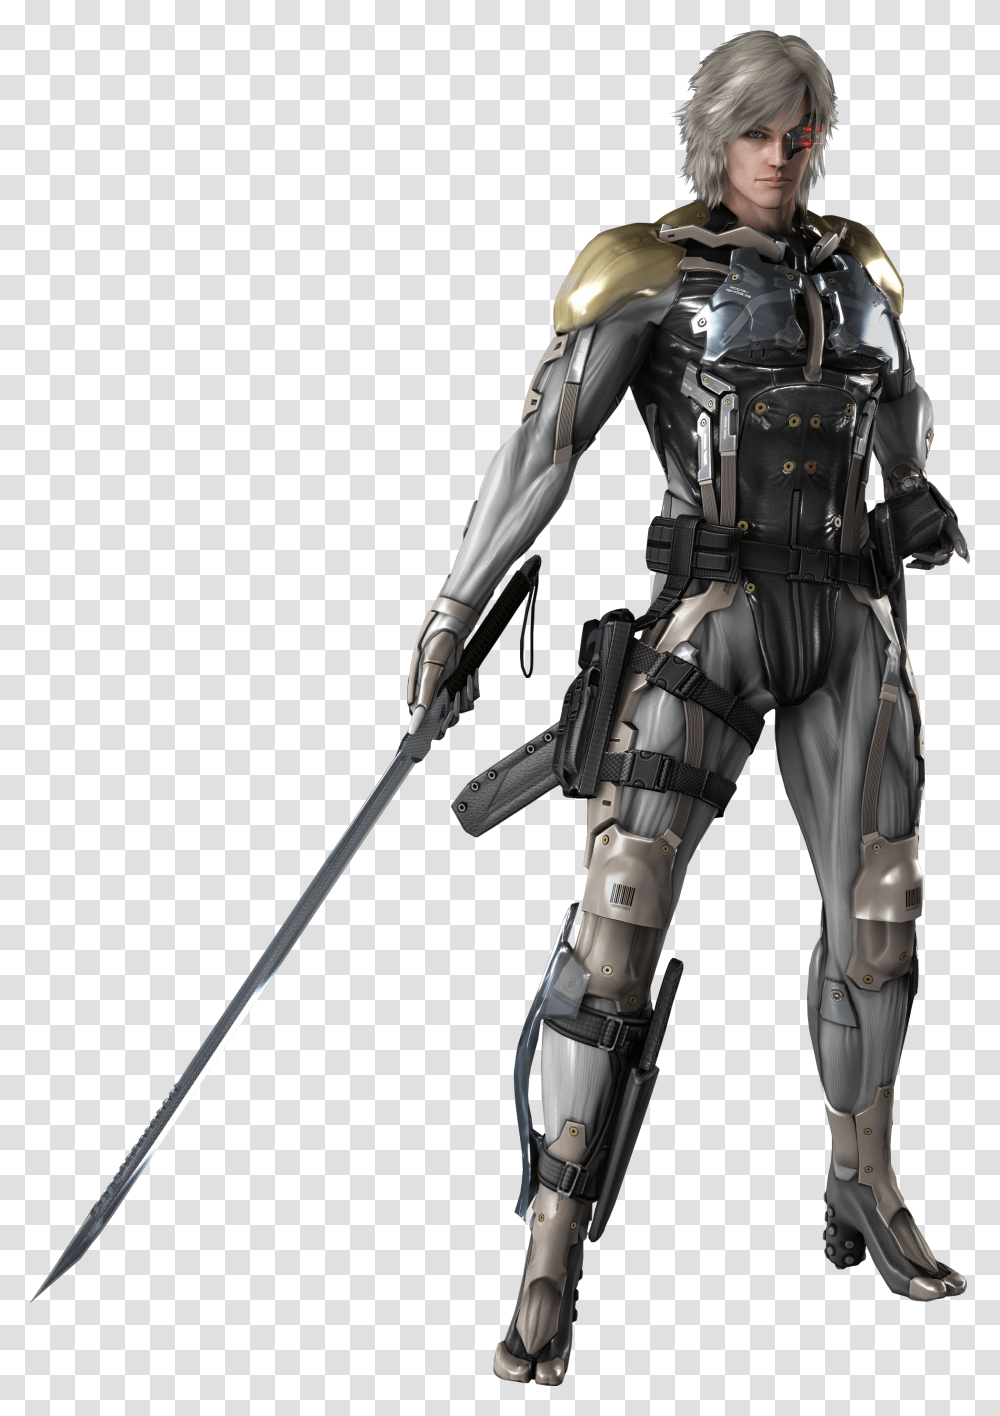 Metal Gear Rising Revengeance Raiden Render By American Metal Gear Rising Revengeance Raiden Skins, Armor, Person, Human Transparent Png